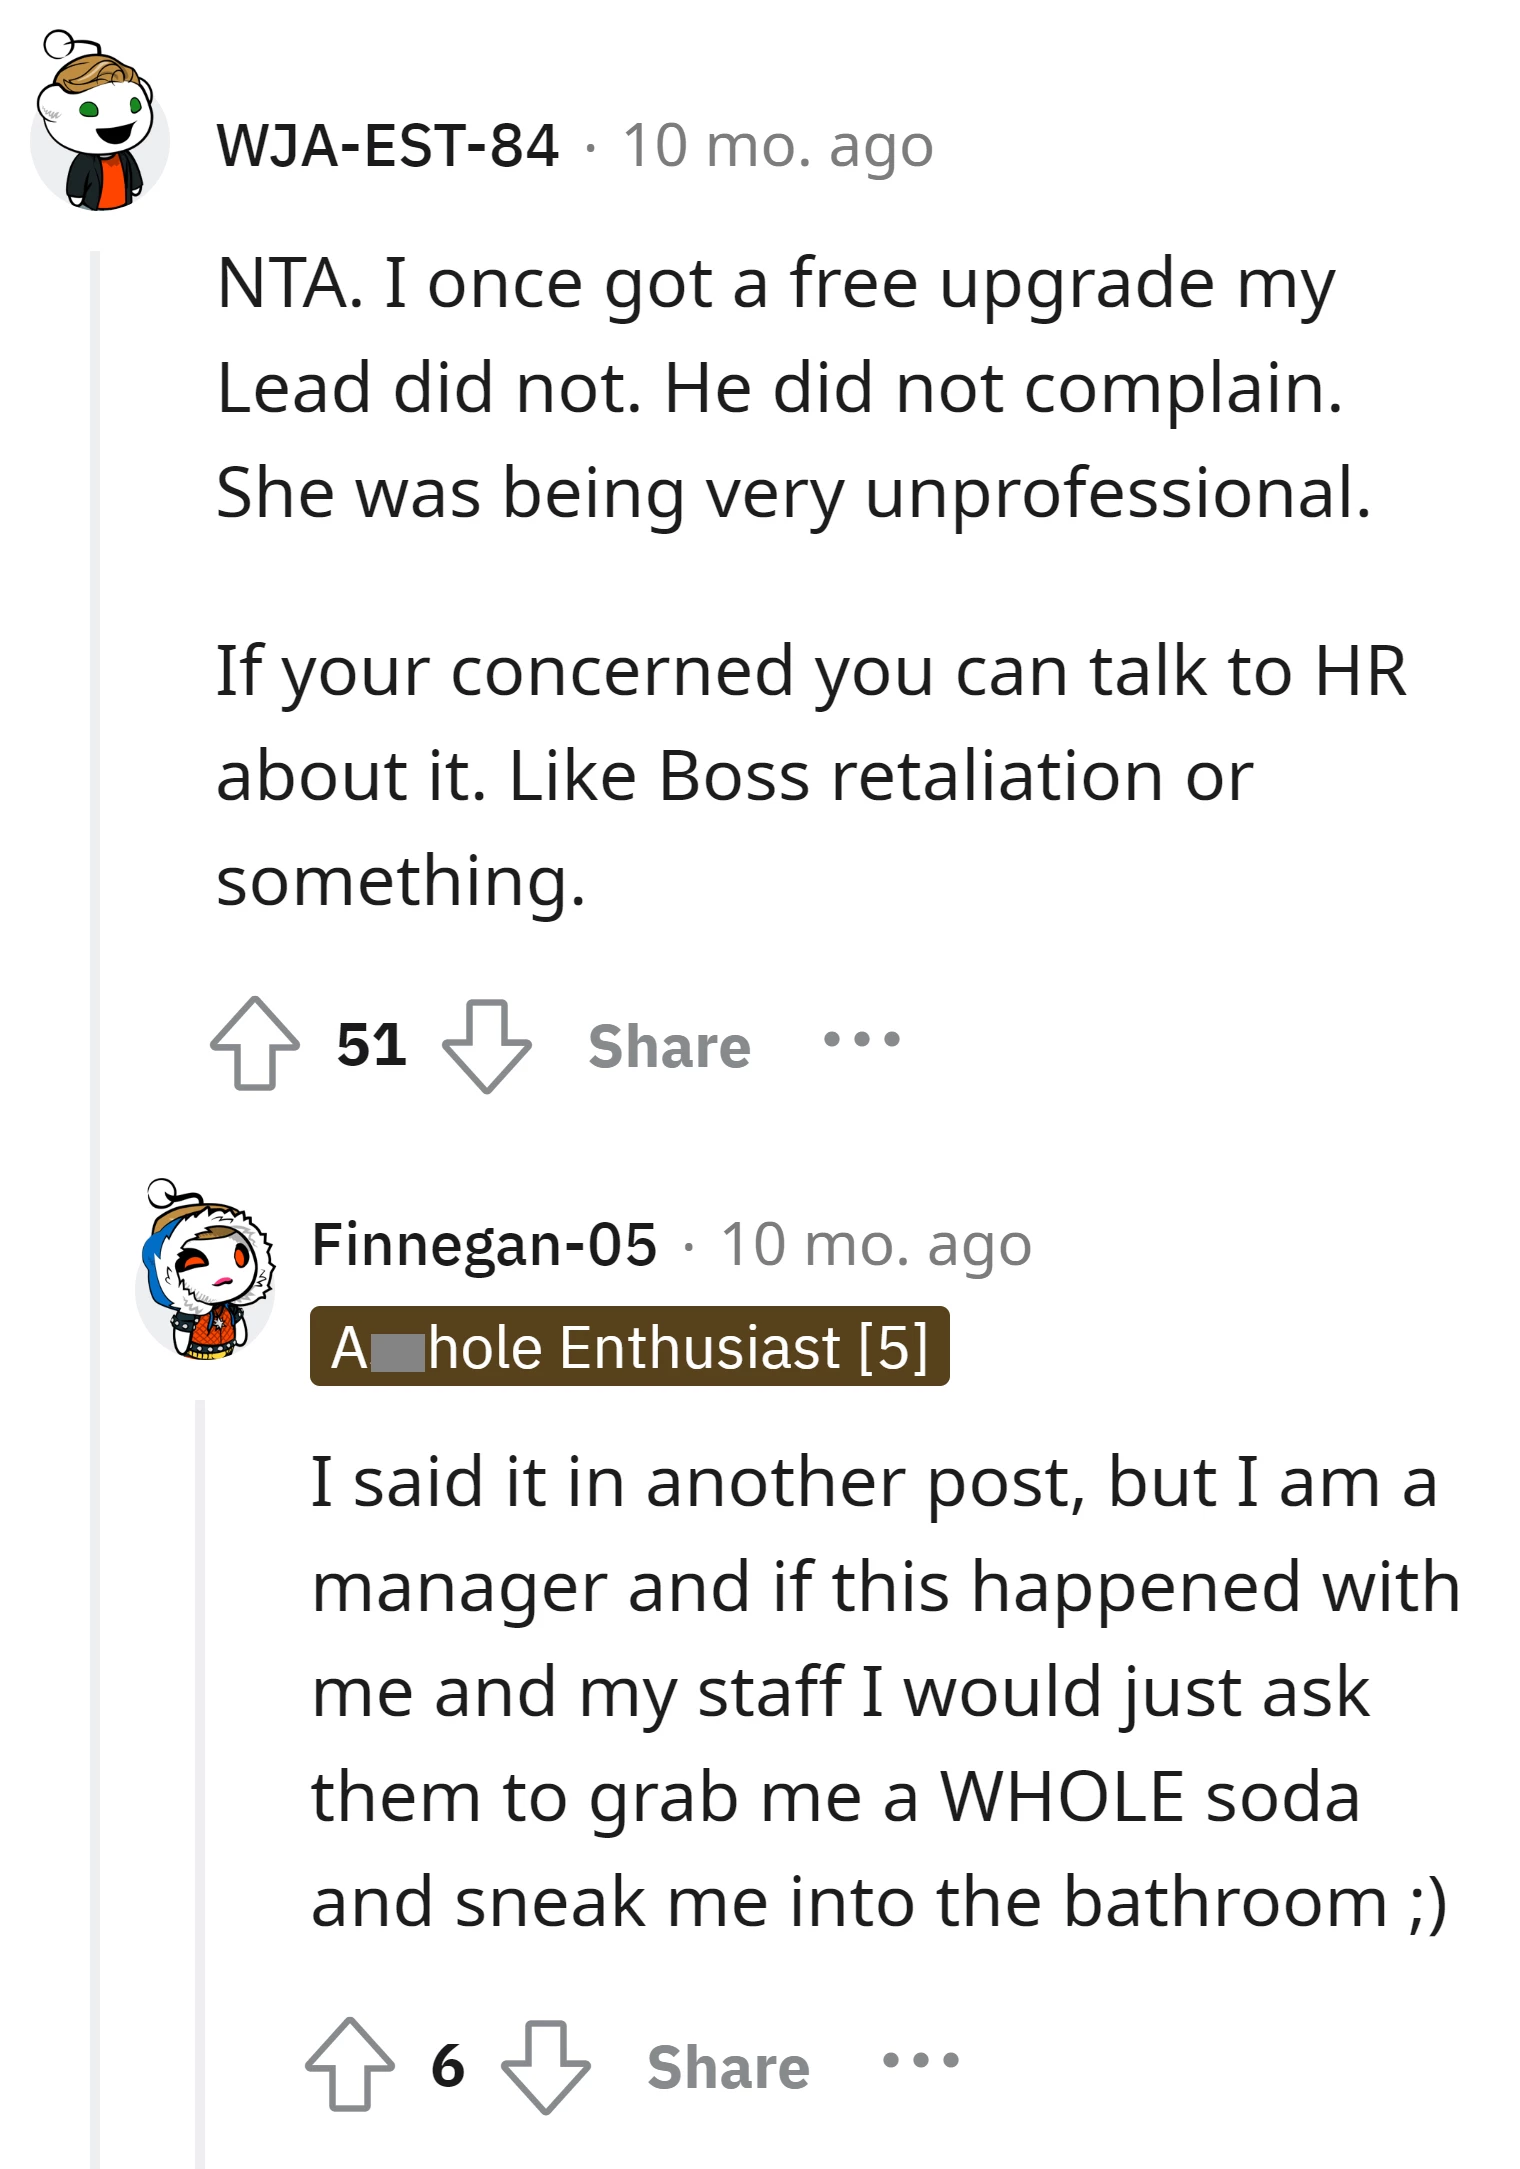 This Redditor had similar experience where their lead didn't complain about a missed upgrade